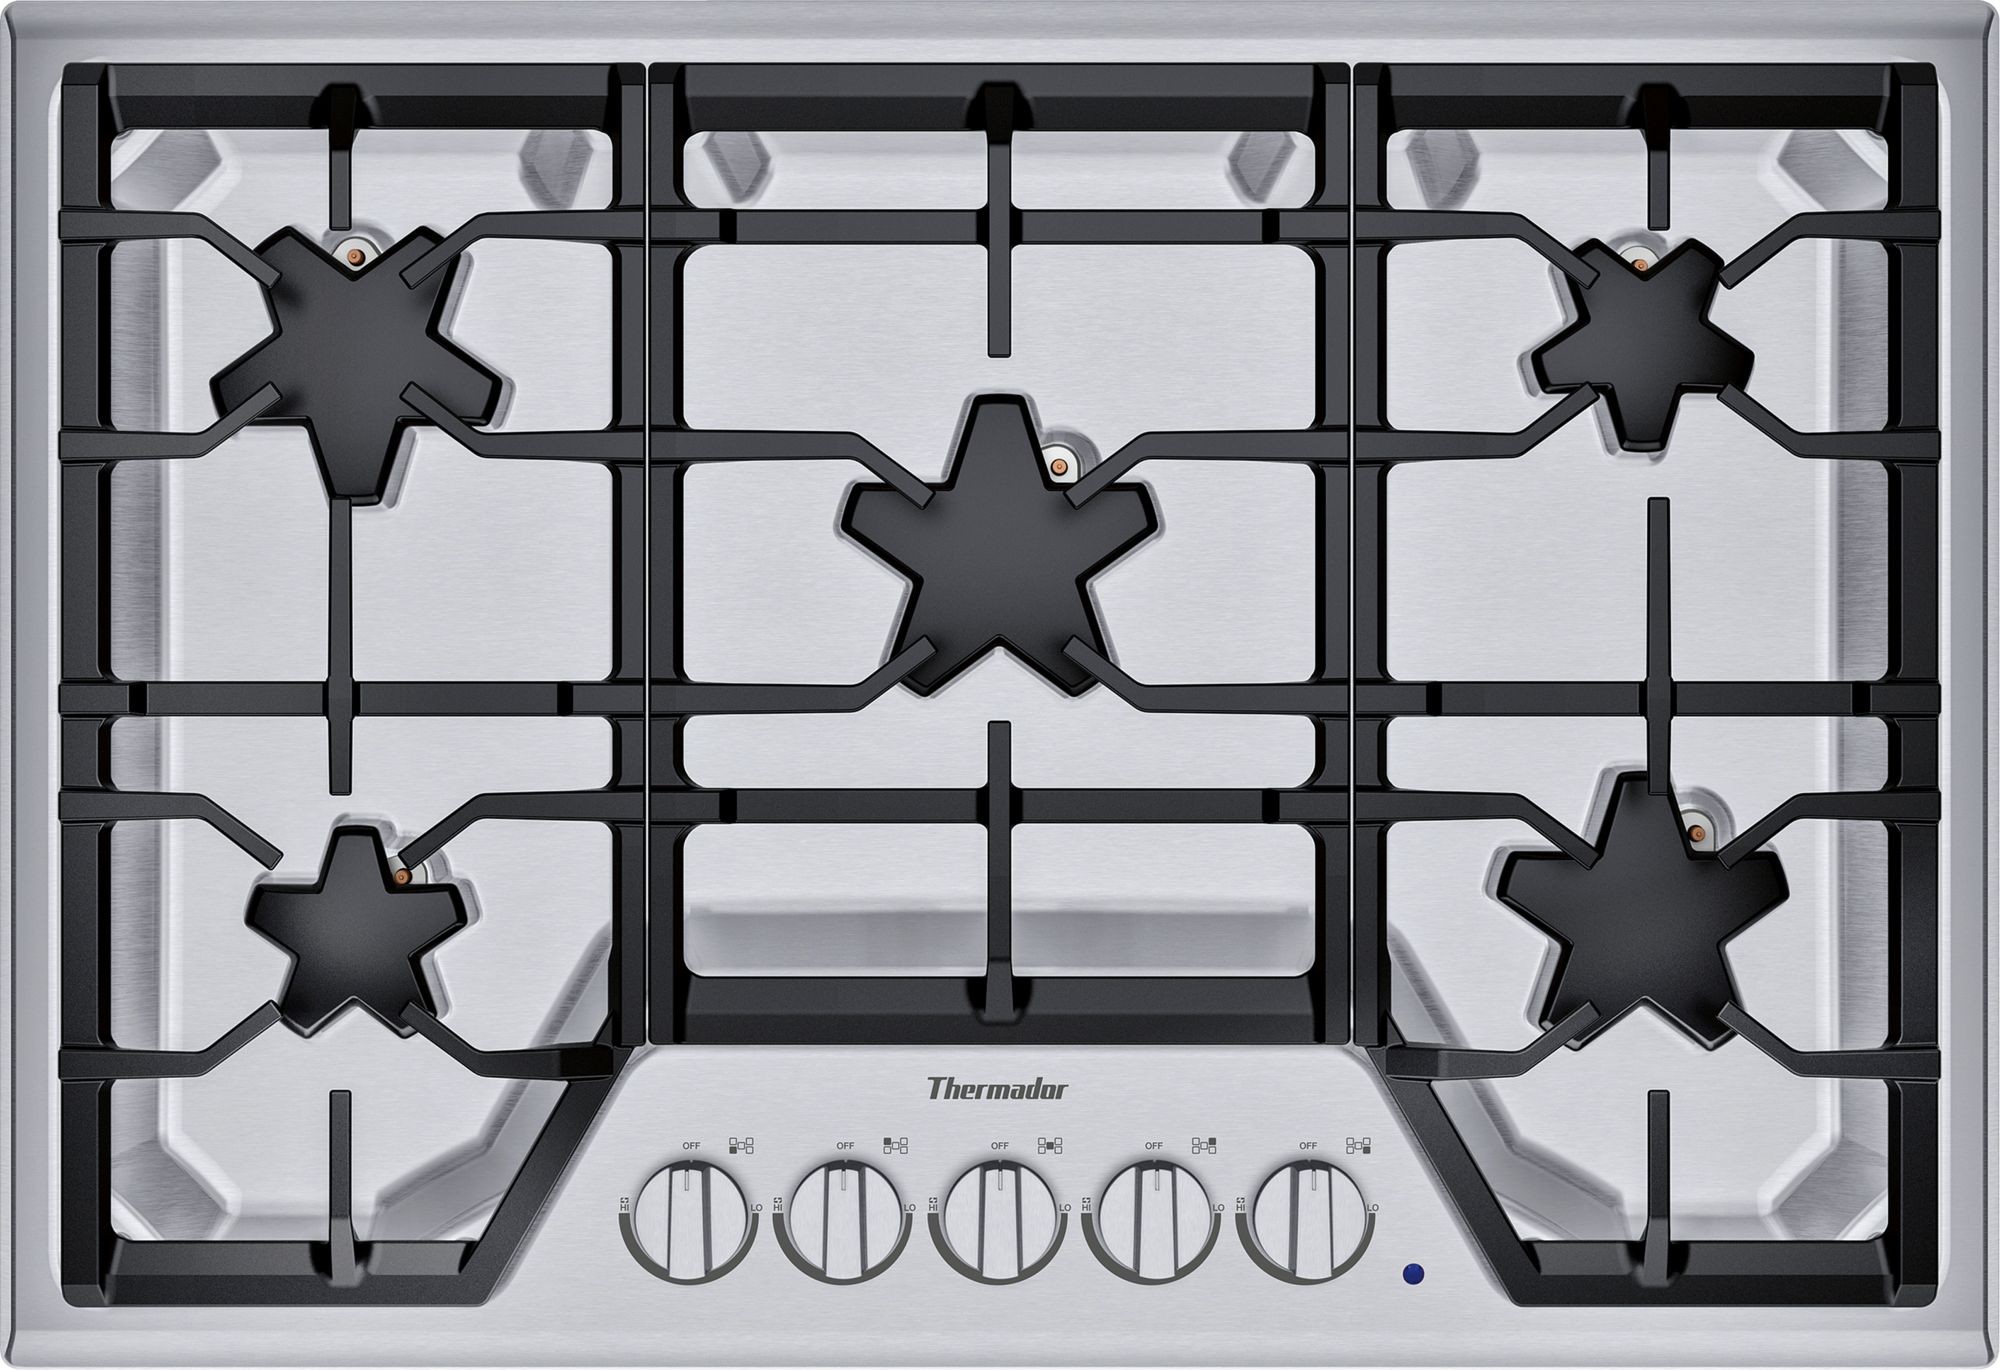 Thermador Masterpiece 30 Natural Gas Drop-In Cooktop SGS305TS